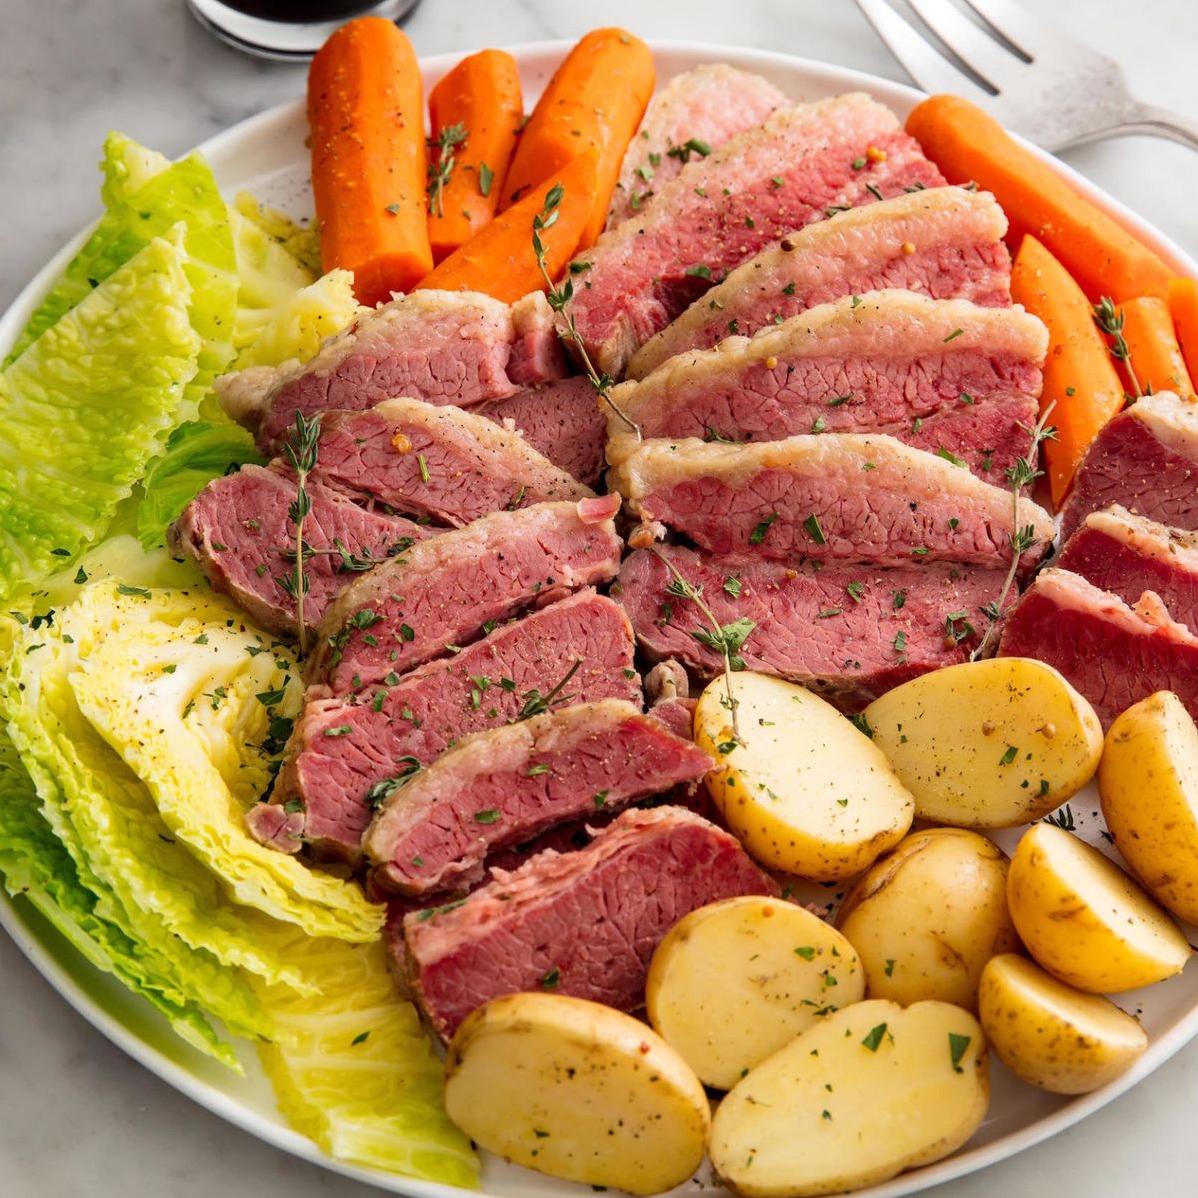  Tender corned beef and cabbage simmering in savory broth is a sight to see!